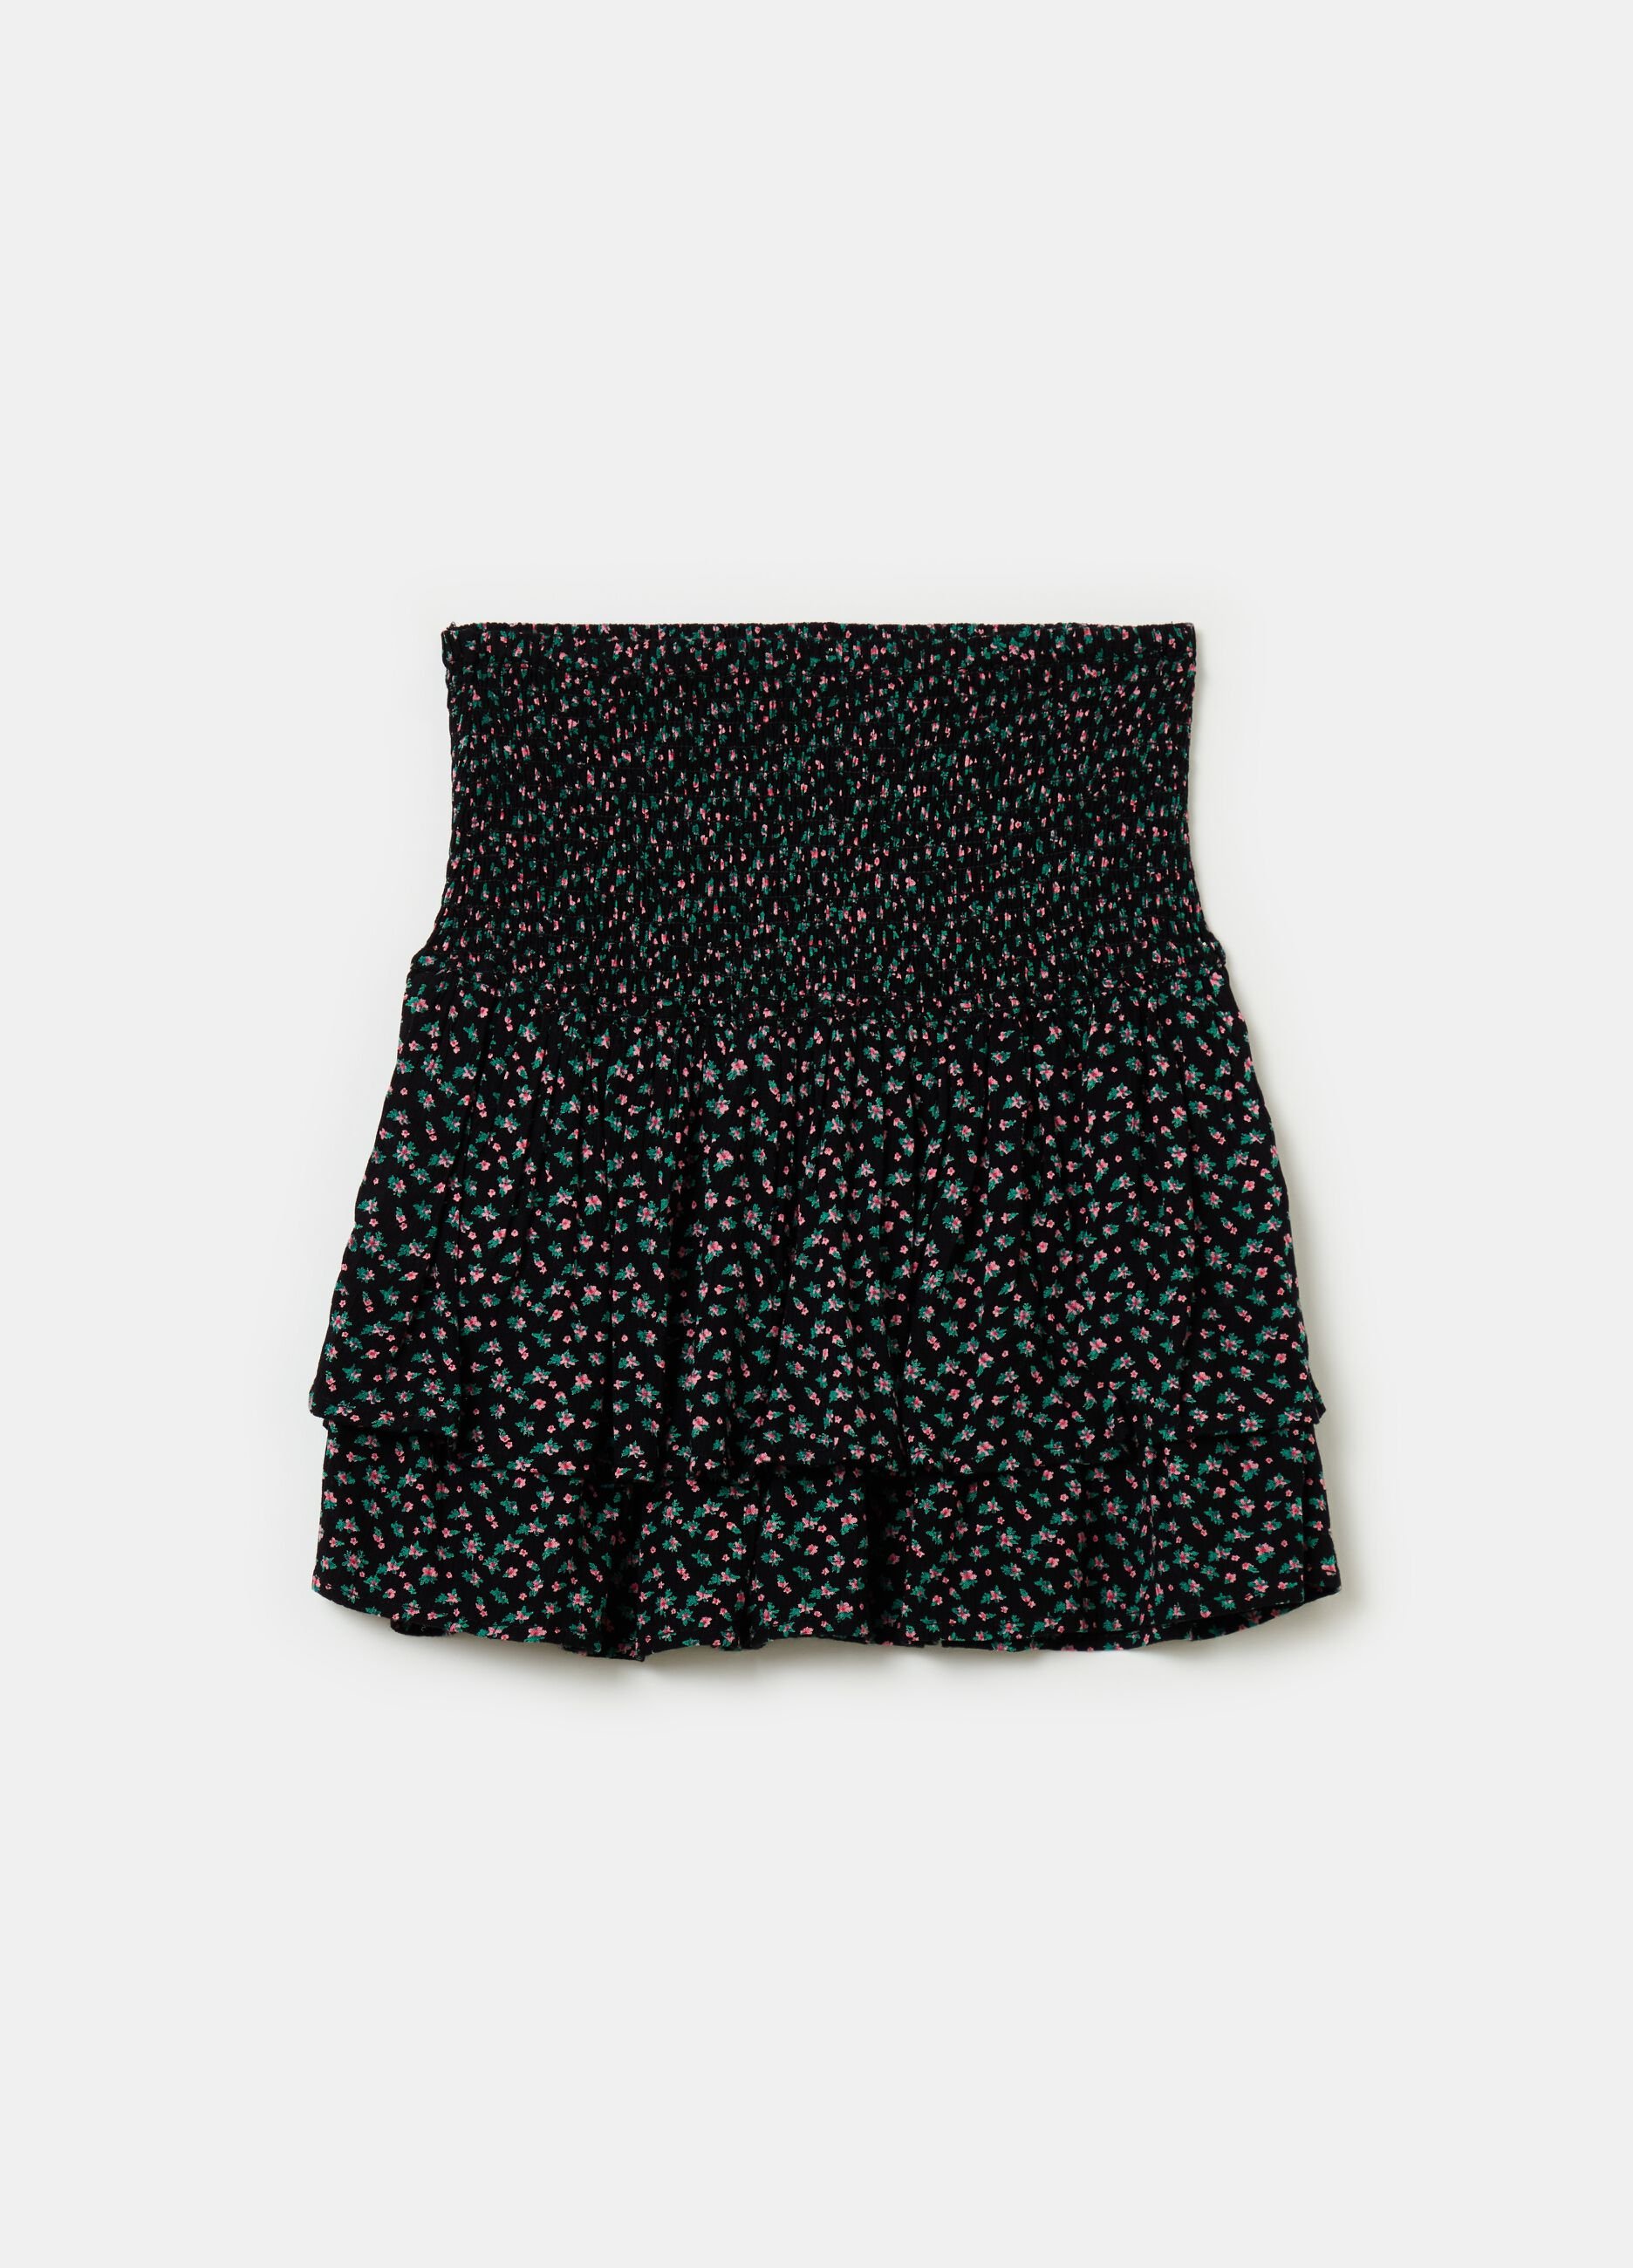 Tiered skirt with floral pattern